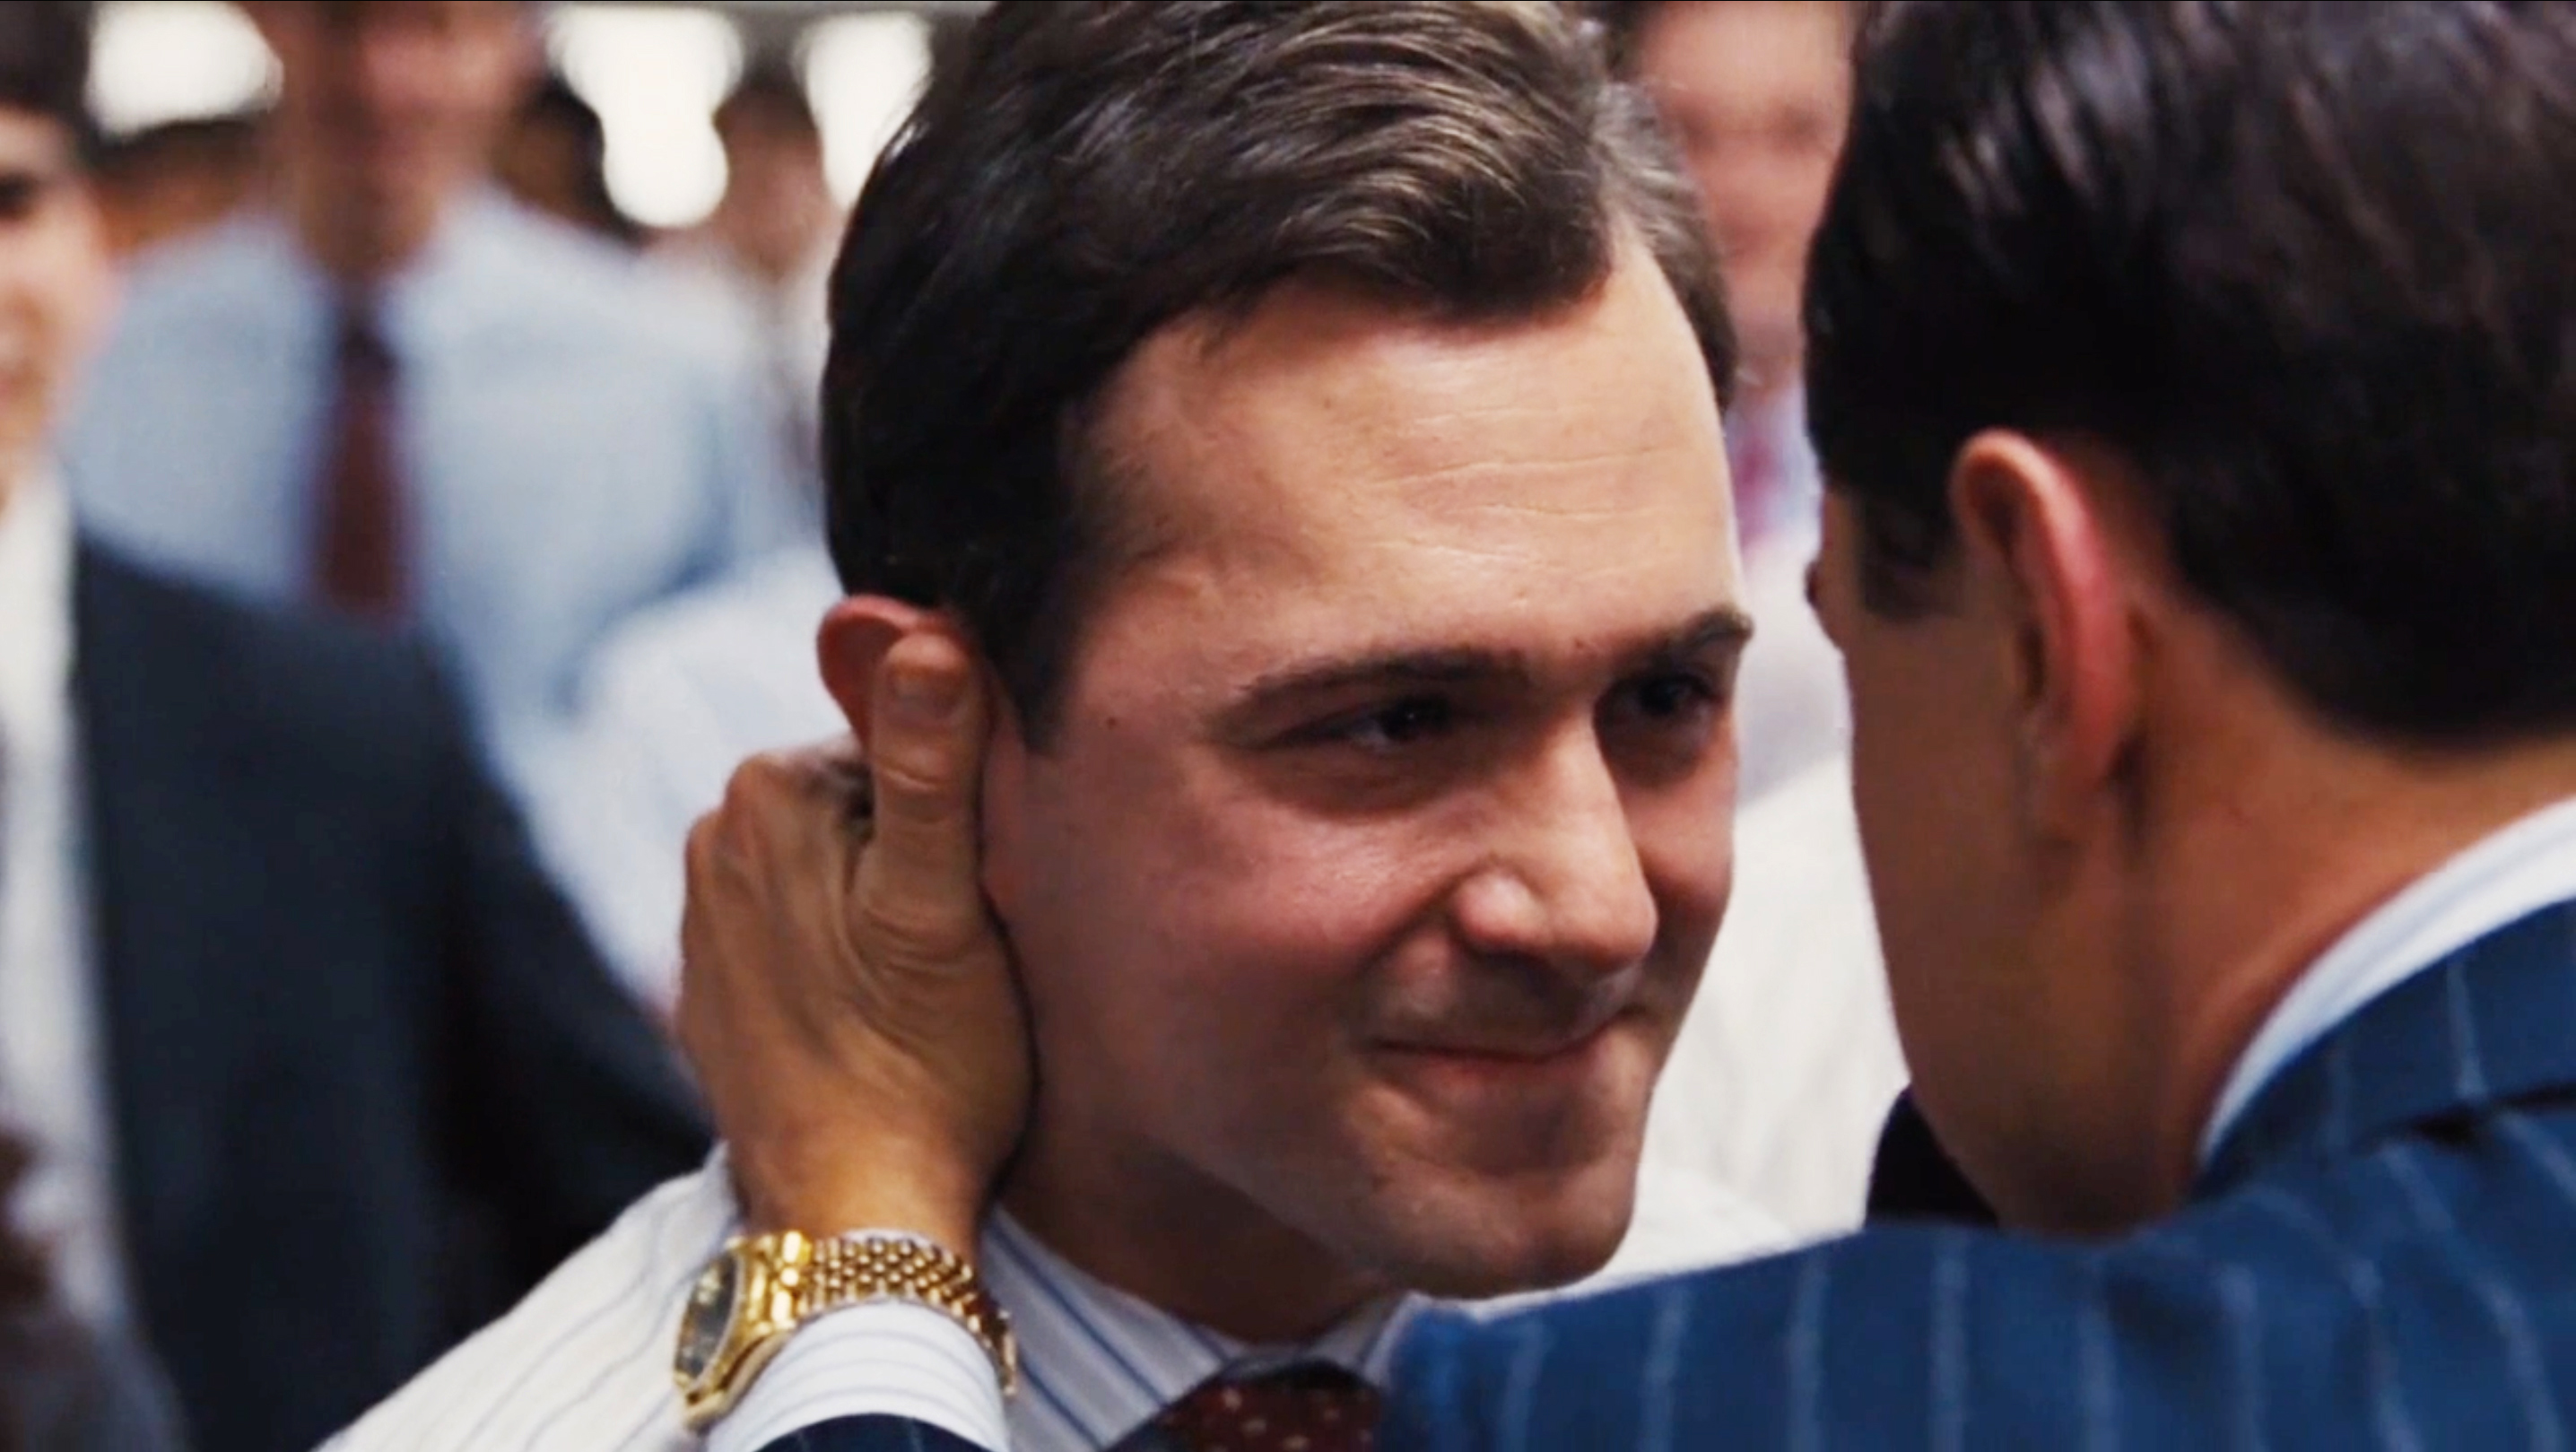 Still of Johnathan Tchaikovsky and Leonardo DiCaprio in The Wolf of Wall Street (2013)